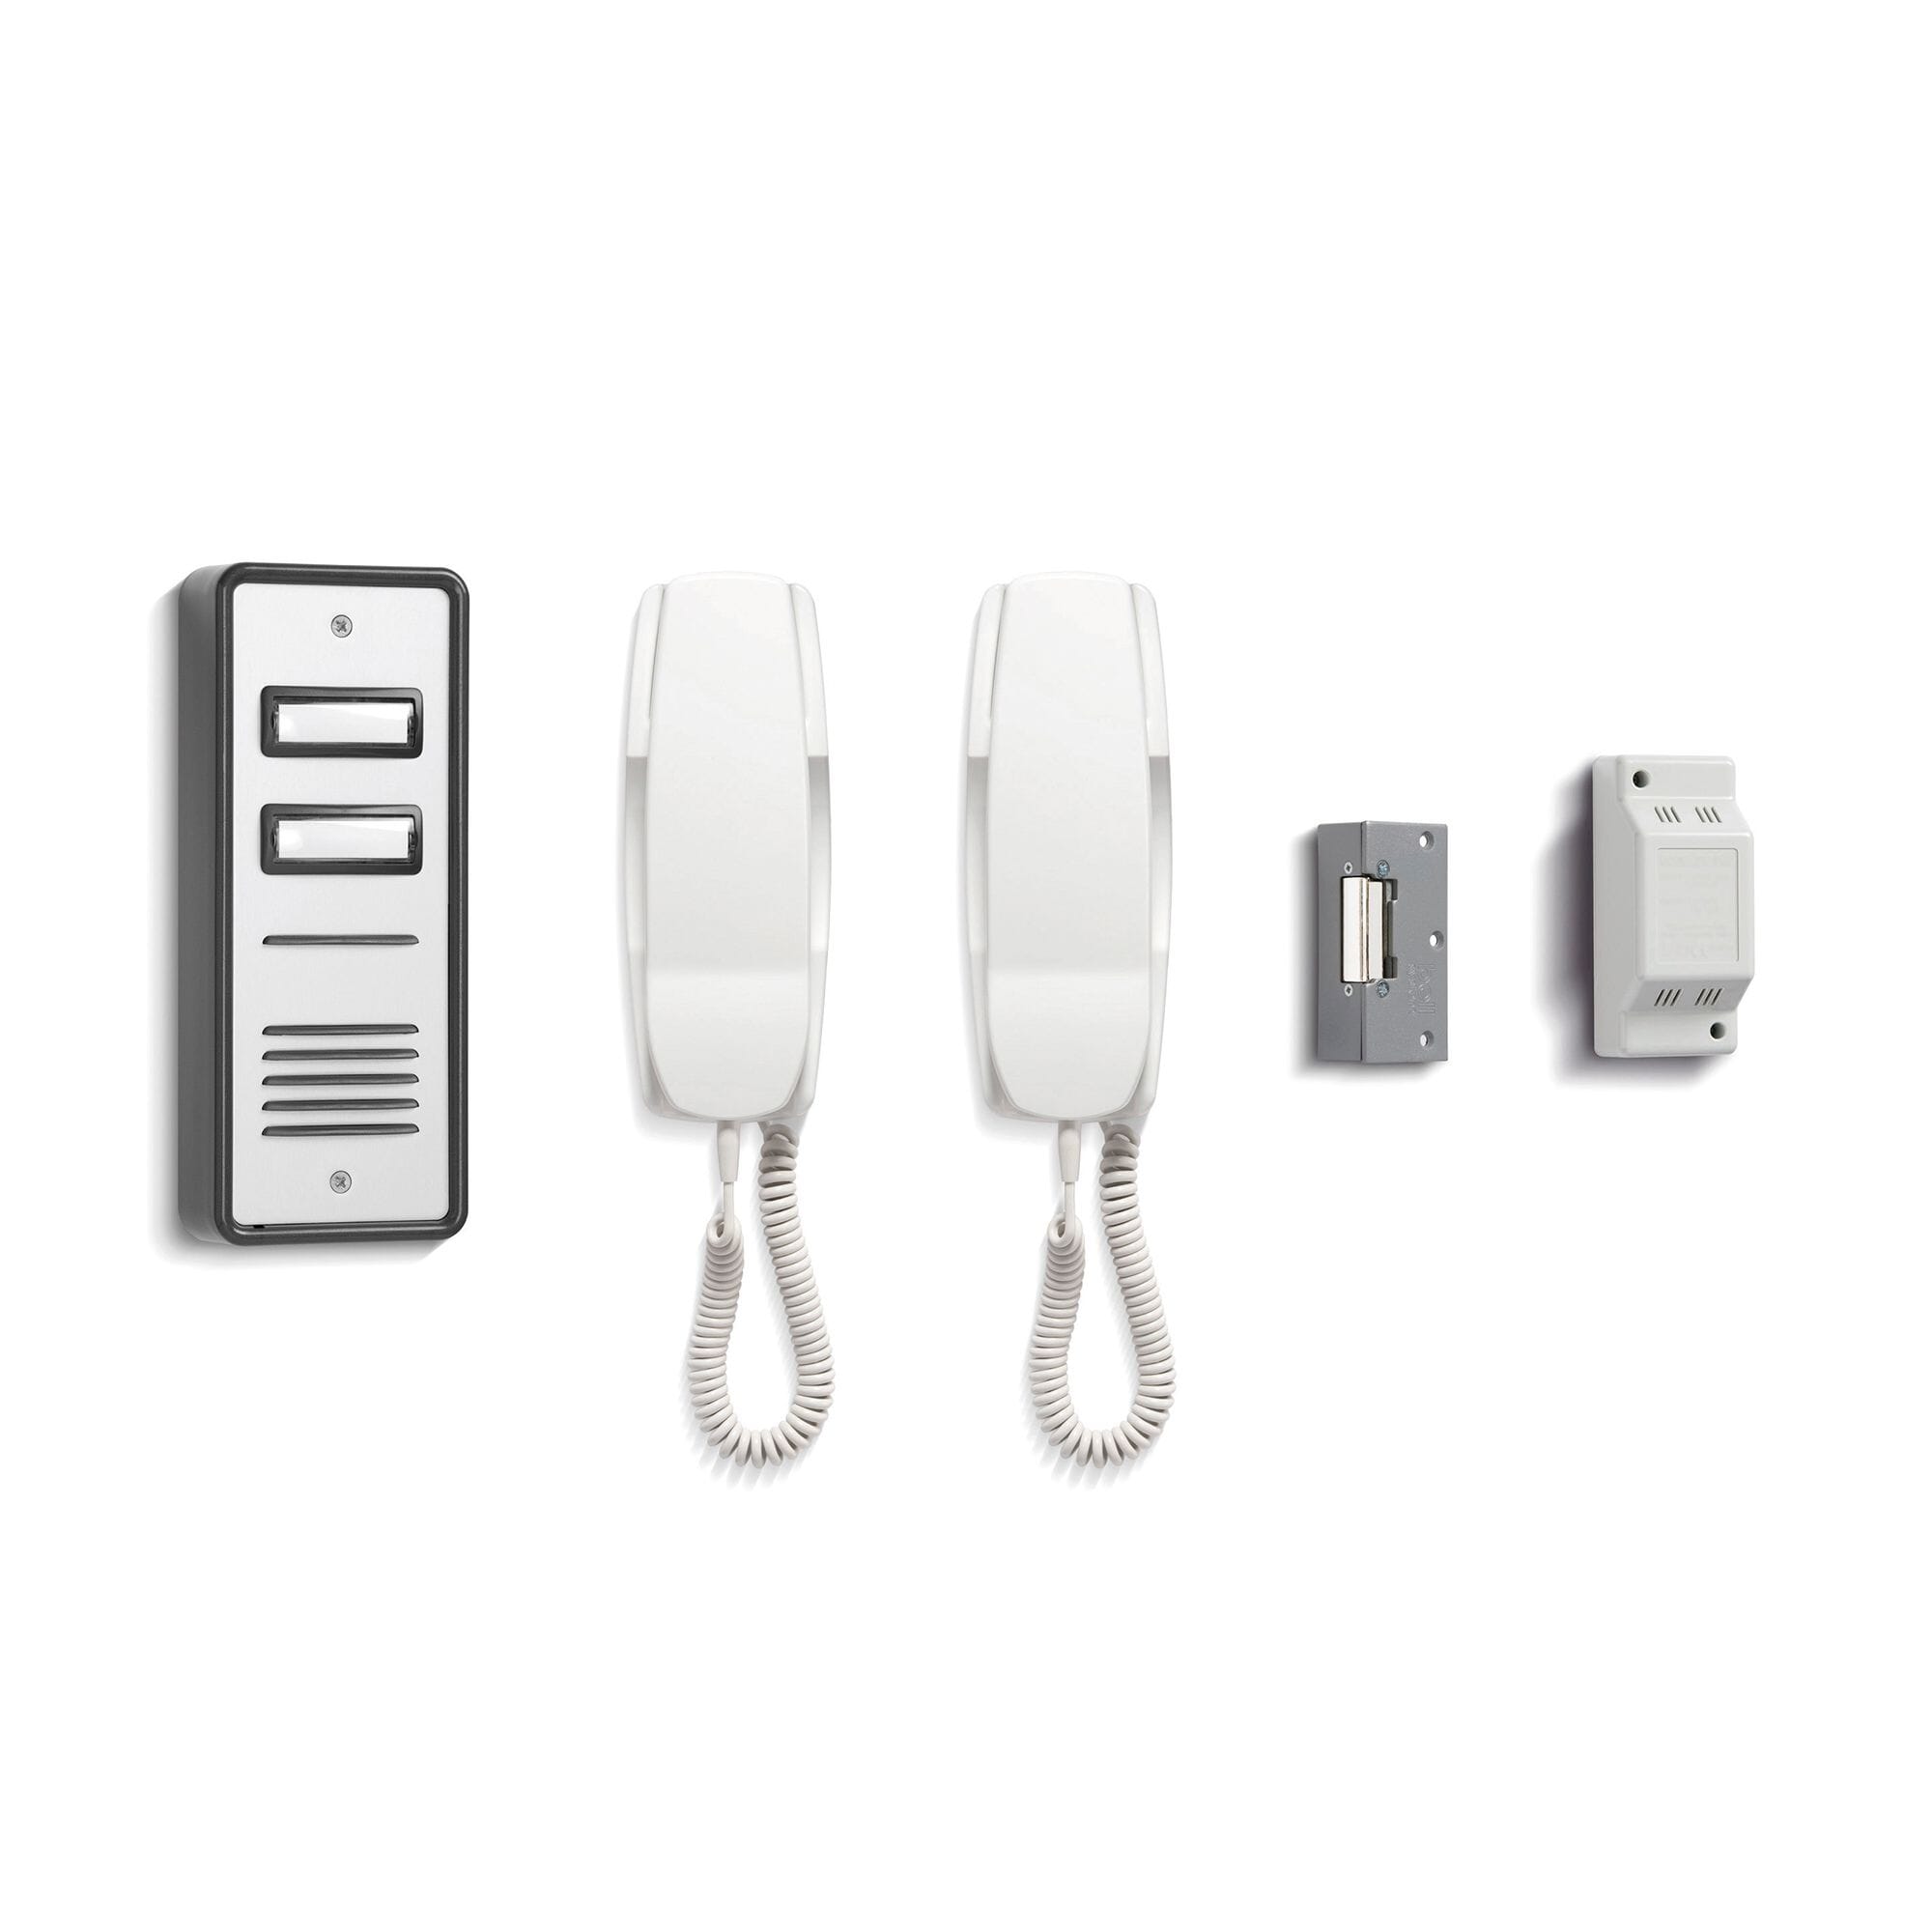 View Bell Surface Mount 2 Way Door Entry System information